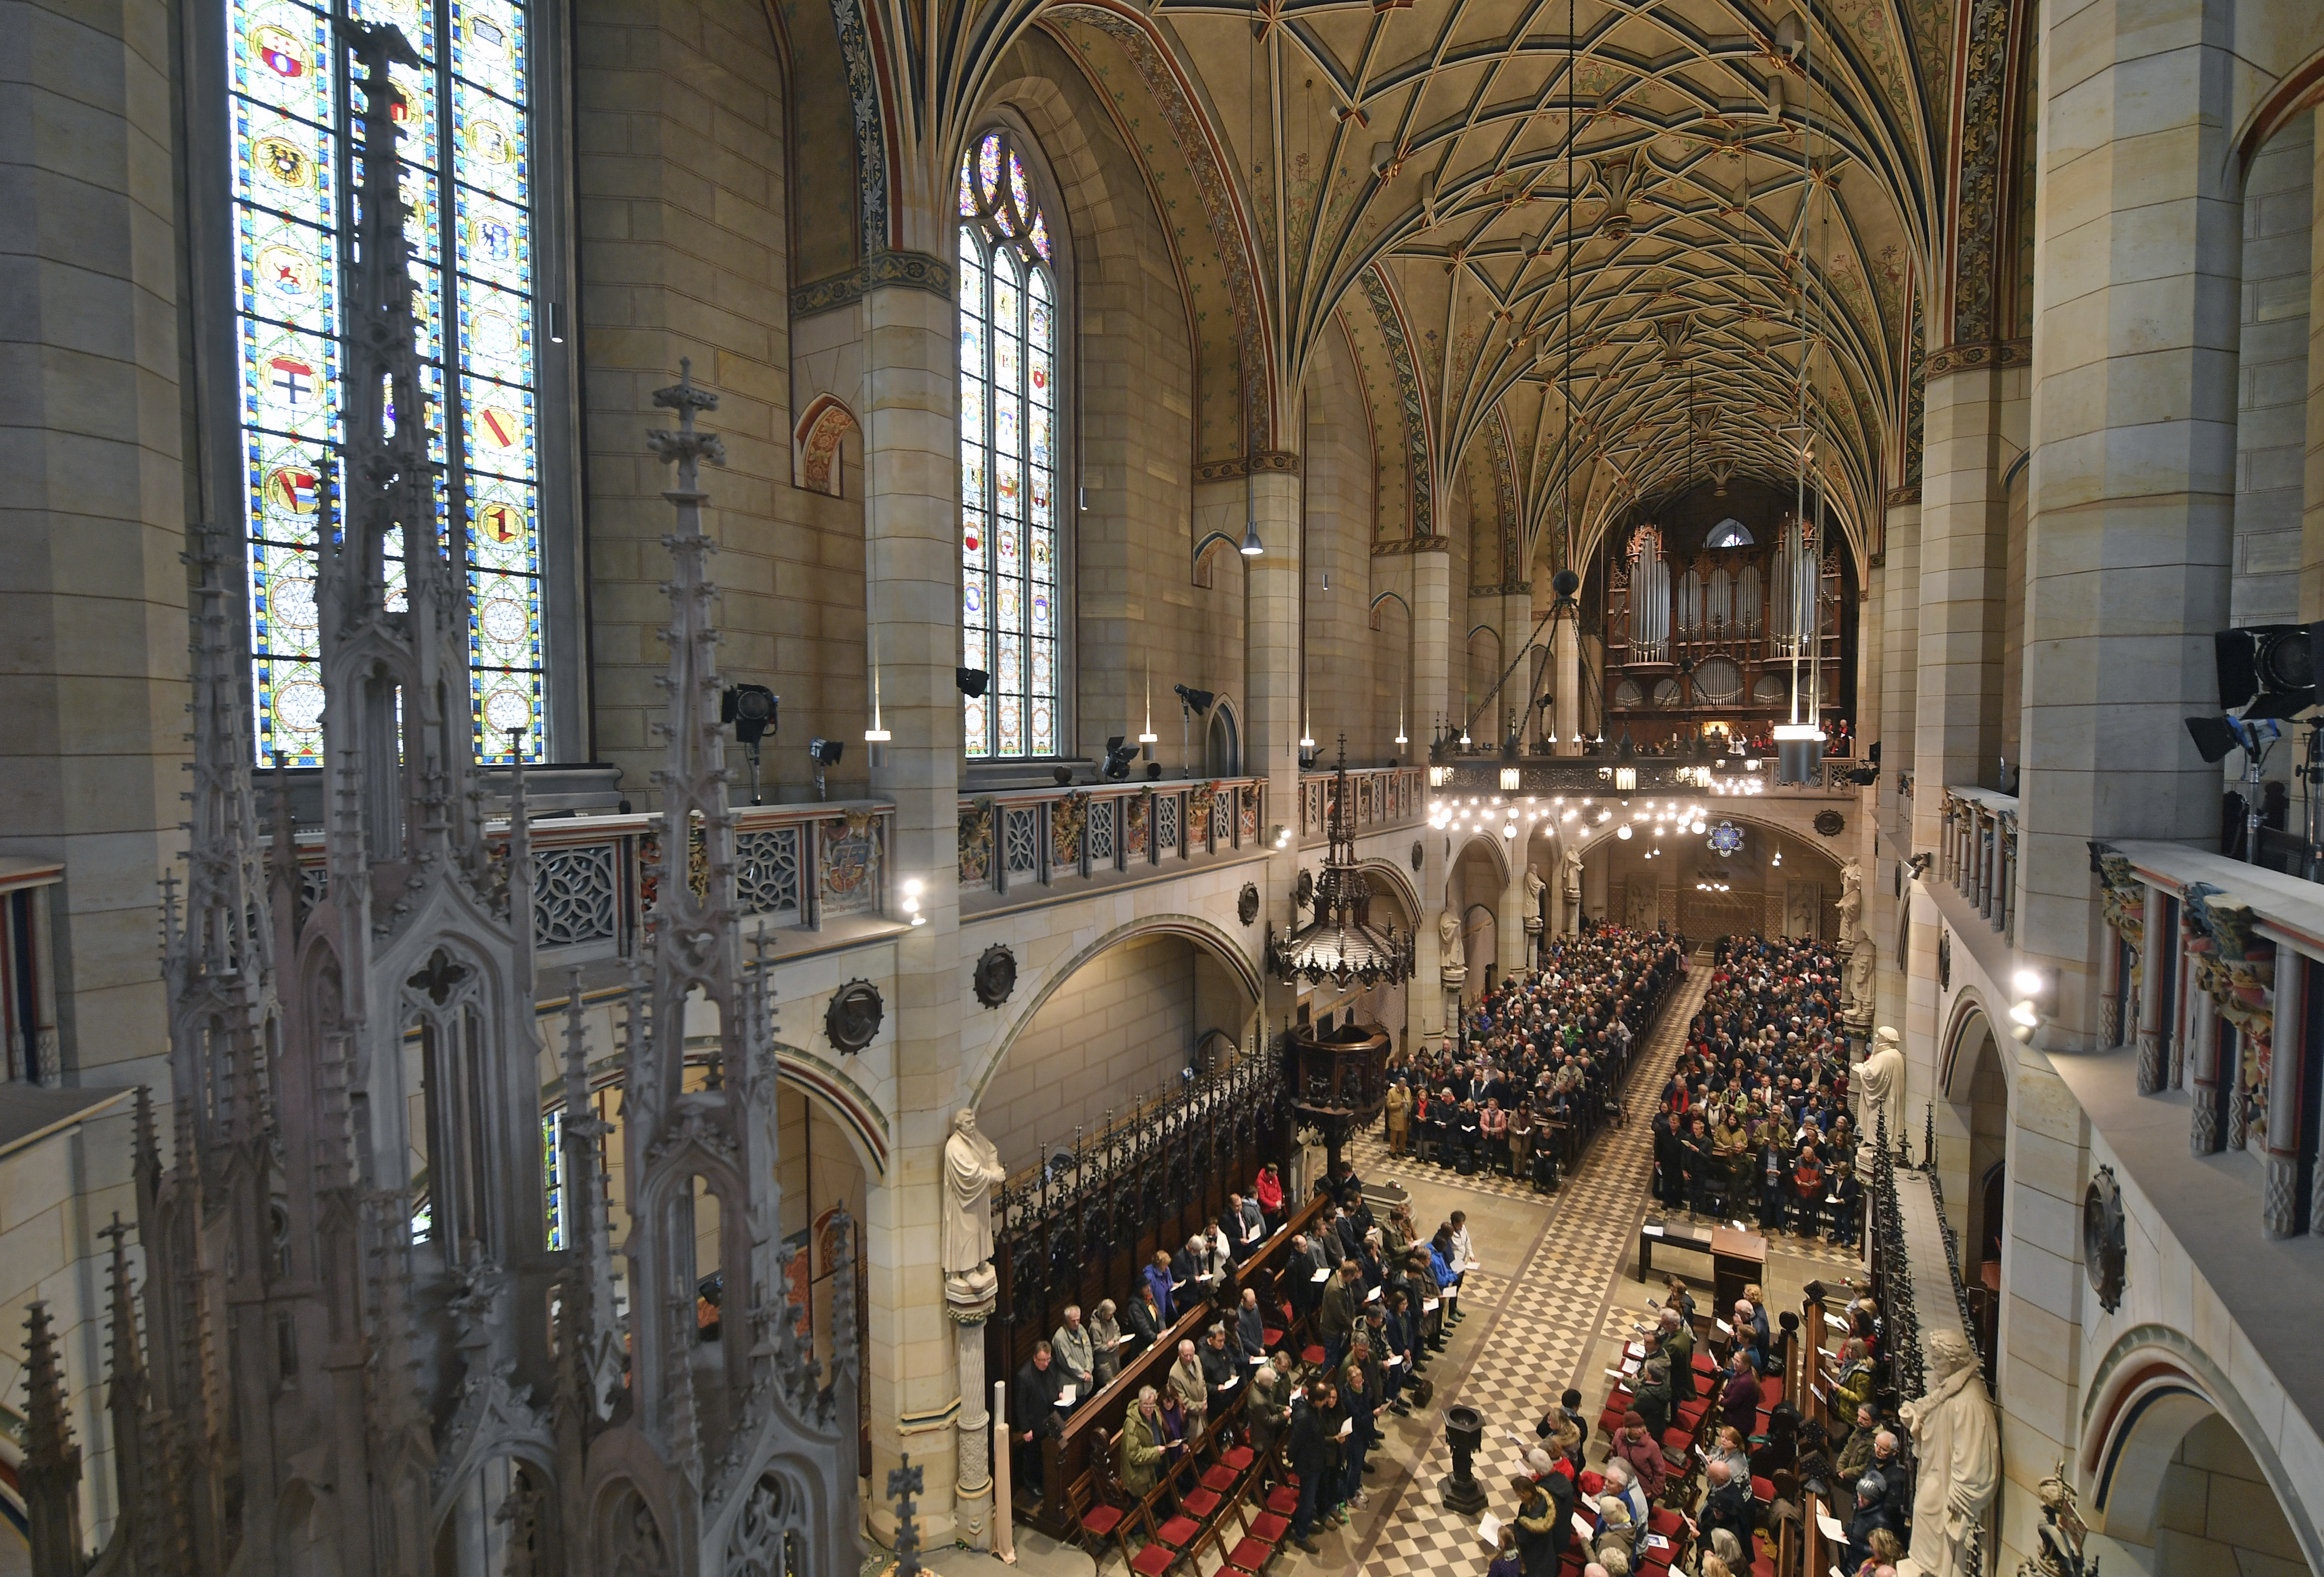 Visitors of the service sit in the All Saints' Church or Castle Church  in Wittenberg, Germany, Tuesday Oct. 31,  2017.  German leaders  will mark the 500th anniversary of the day Martin Luther is said to have nailed his theses challenging the Catholic Church's practice of selling indulgences to a church door, a starting point of the Reformation. (Hendrik Schmidt/dpa via AP)